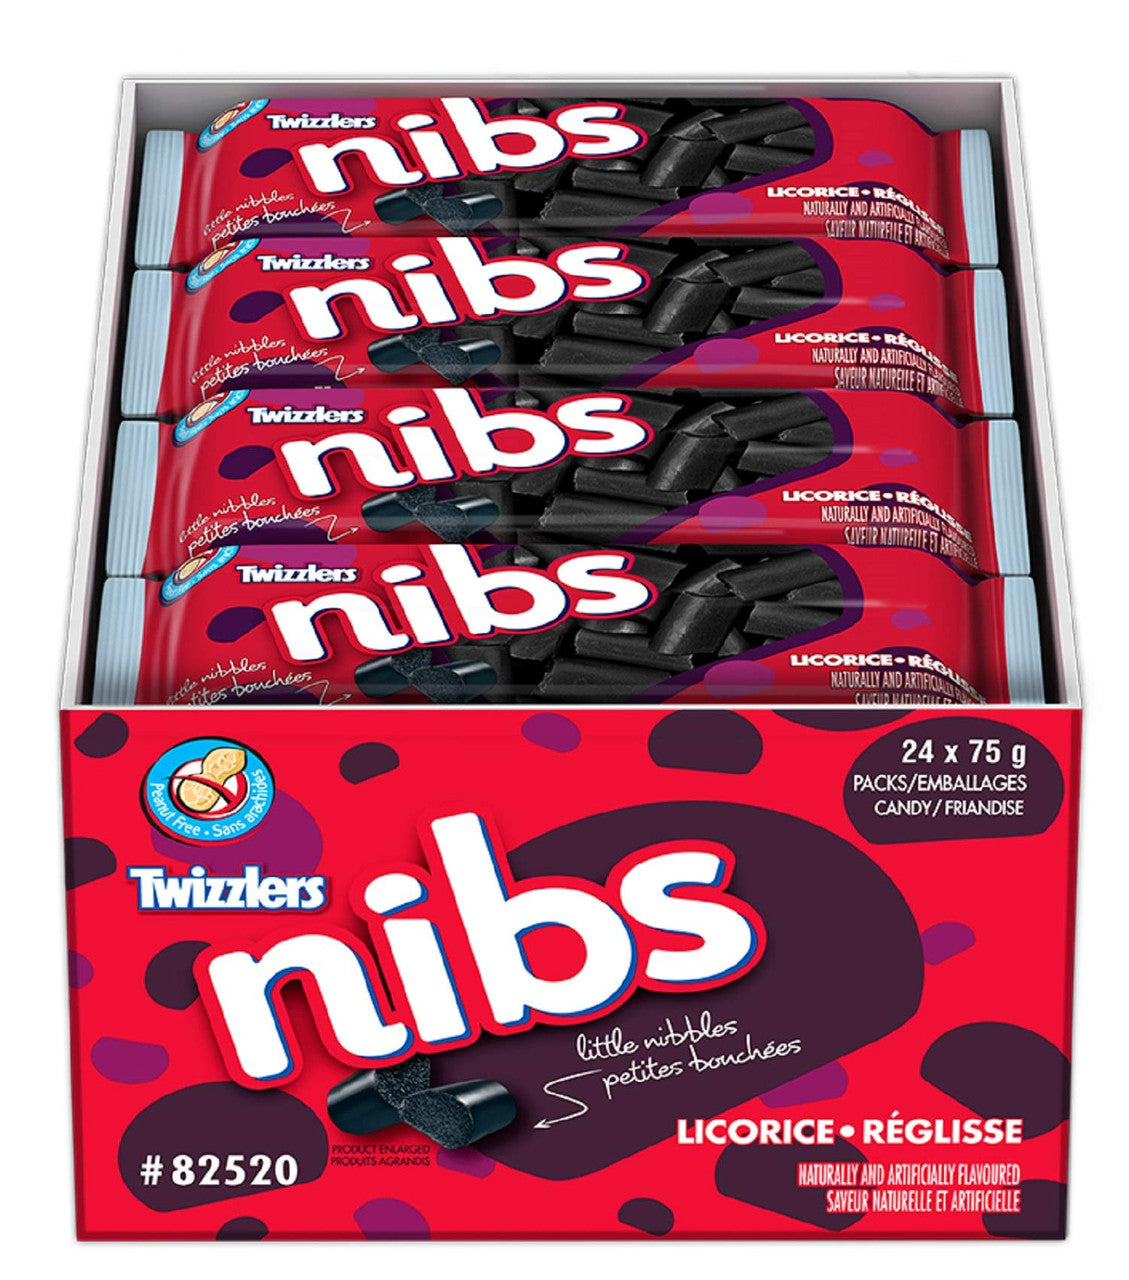 TWIZZLERS Black Licorice Candy, Nibs, 24ct/75g bags, (Imported from Canada)